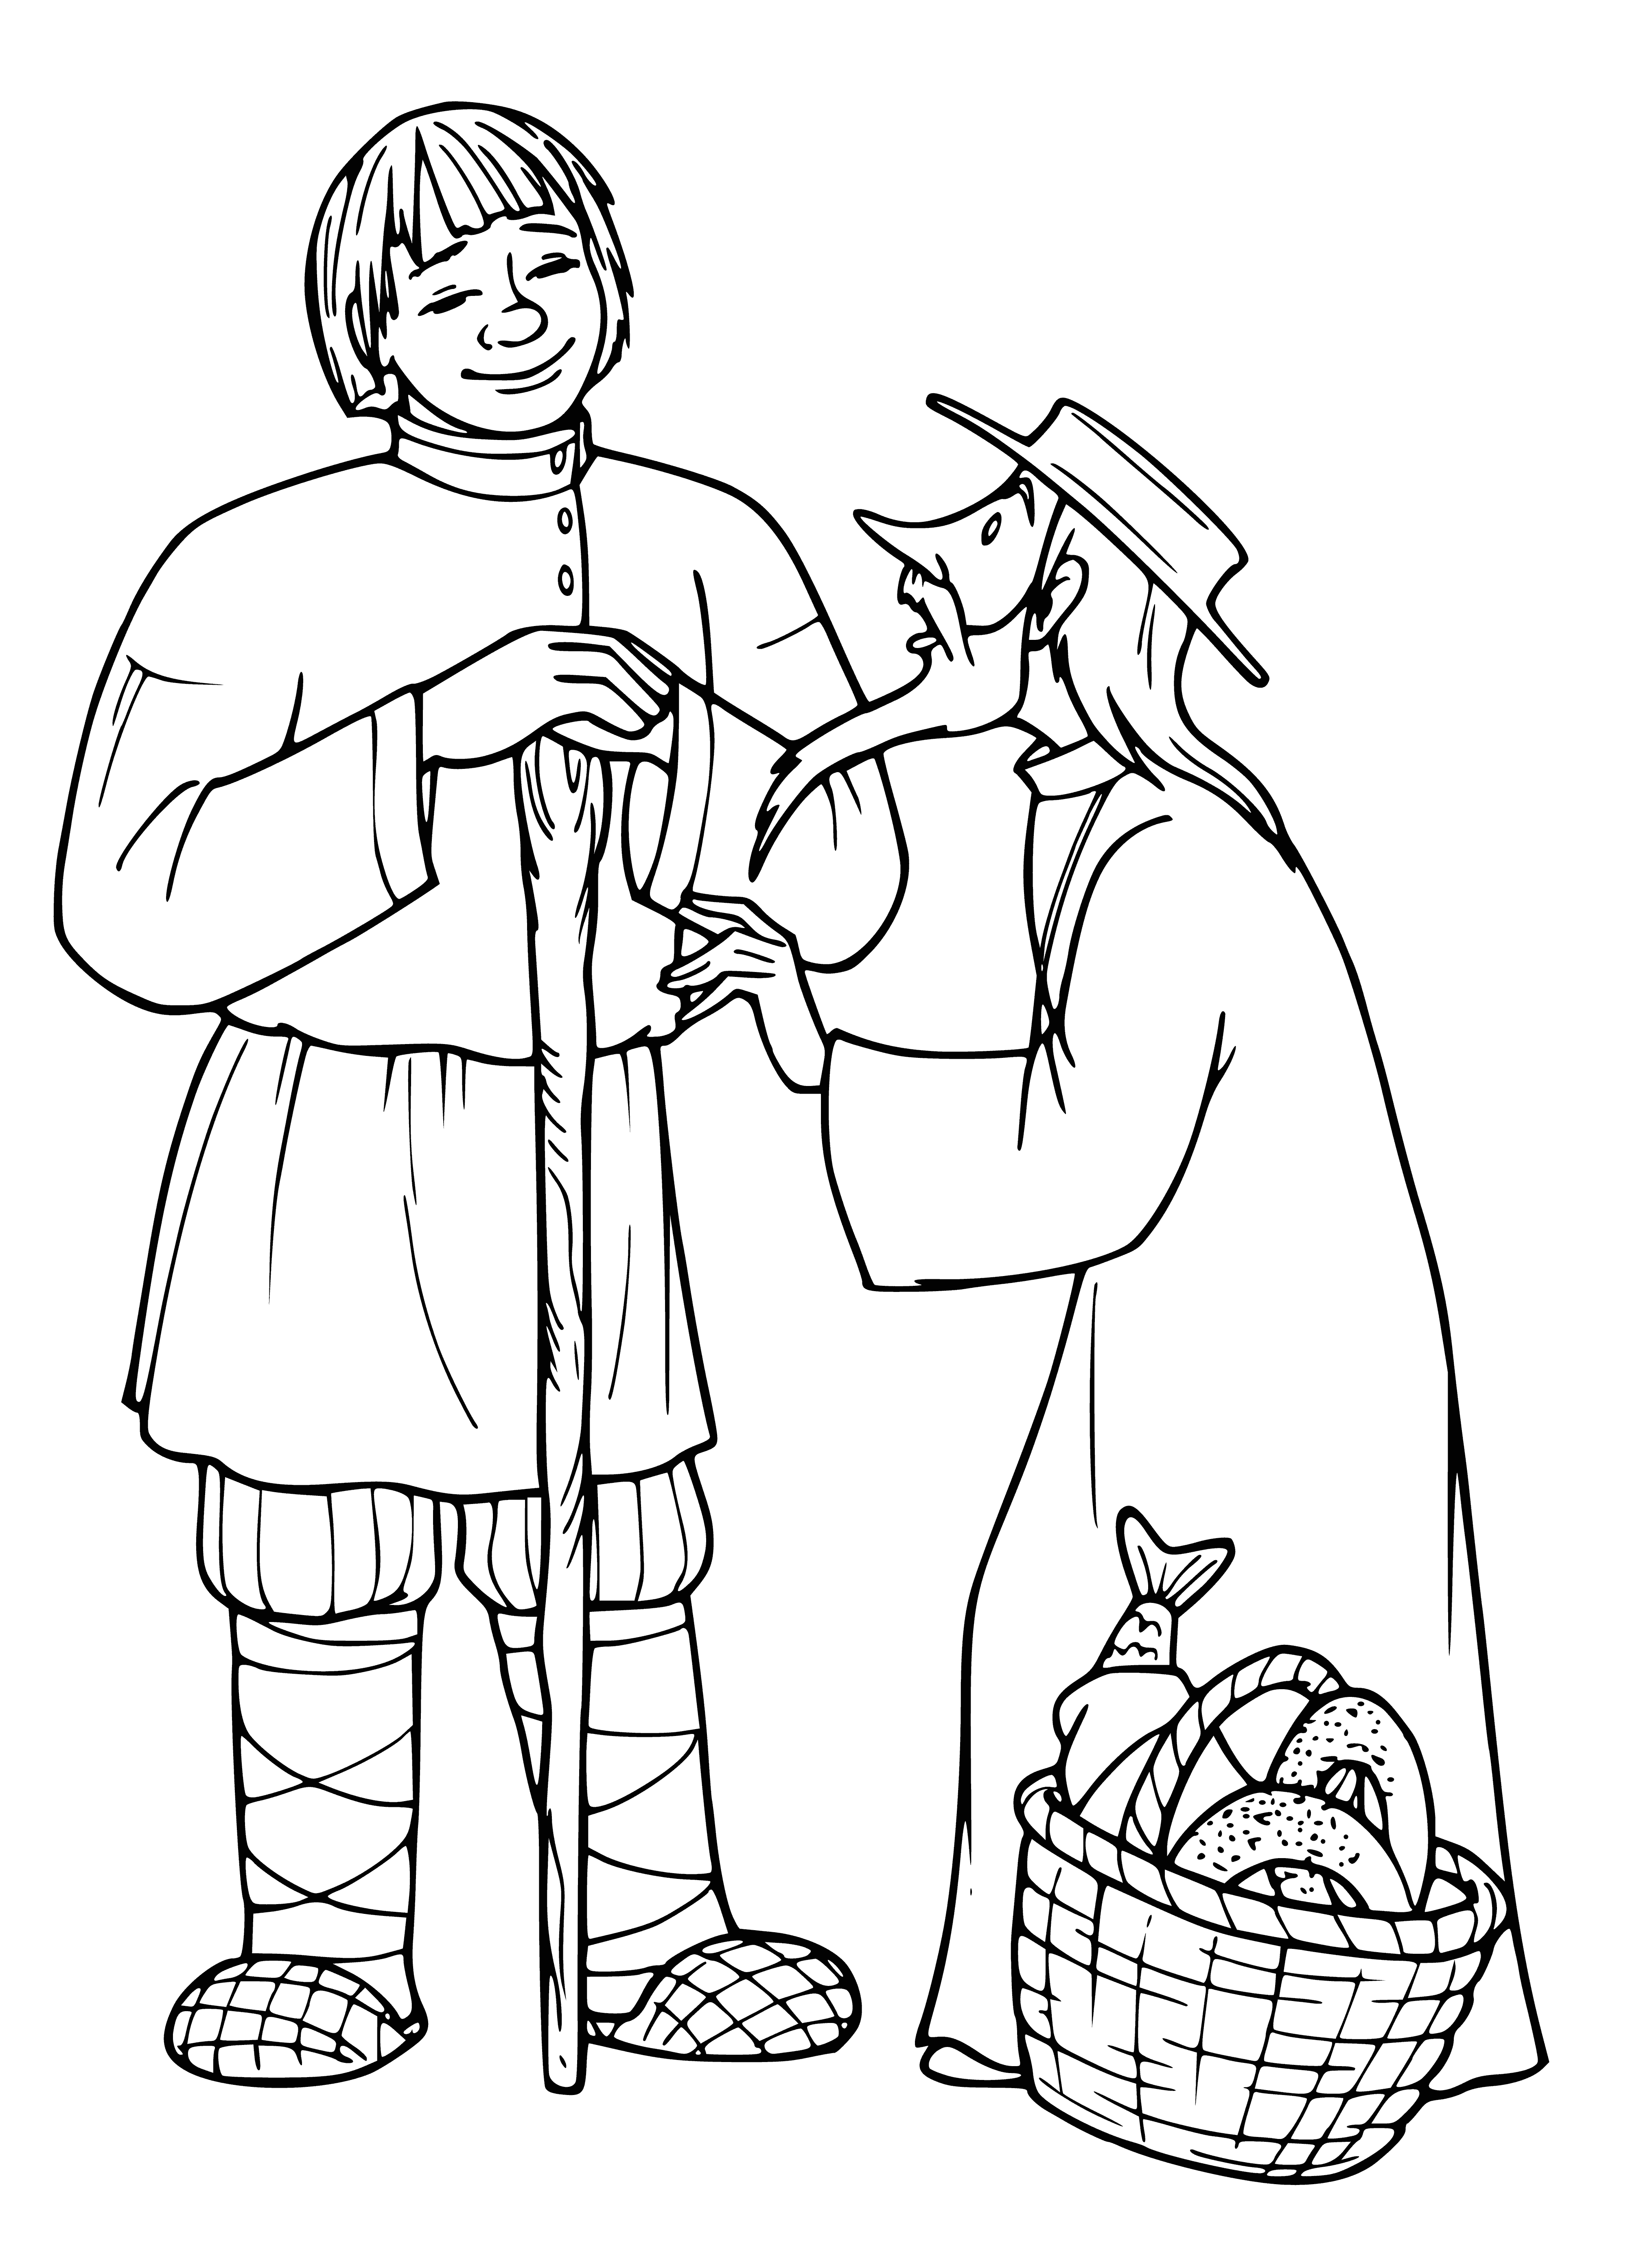 coloring page: Man stands ragged and desperate, holding a broom and a bucket. He has a long, thin face and light hair. Looks poor.